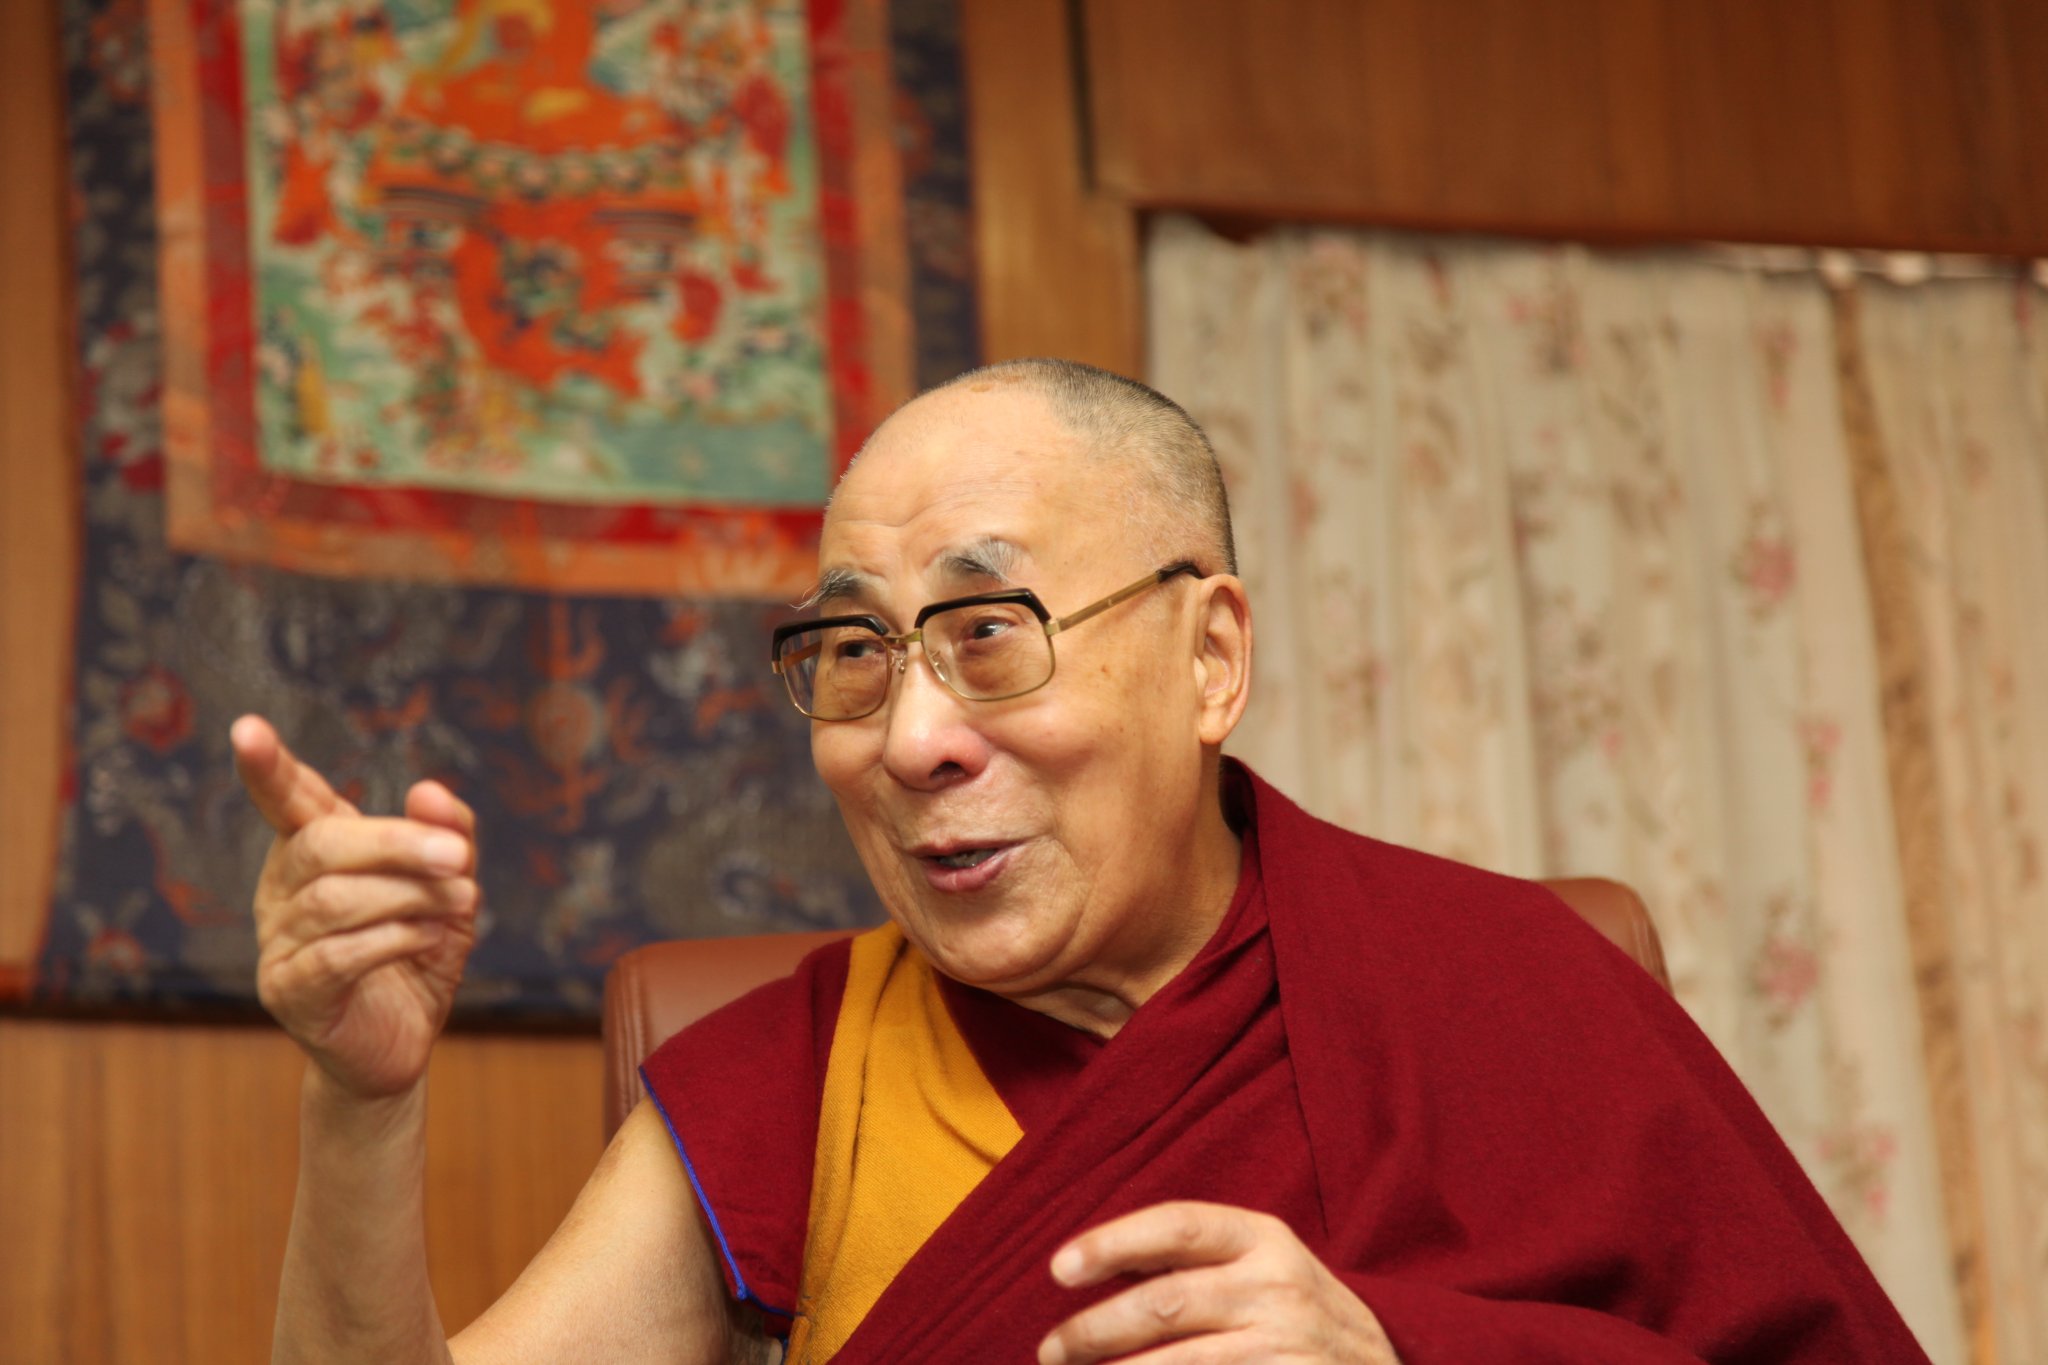 The SPIN Interview: The Dalai Lama